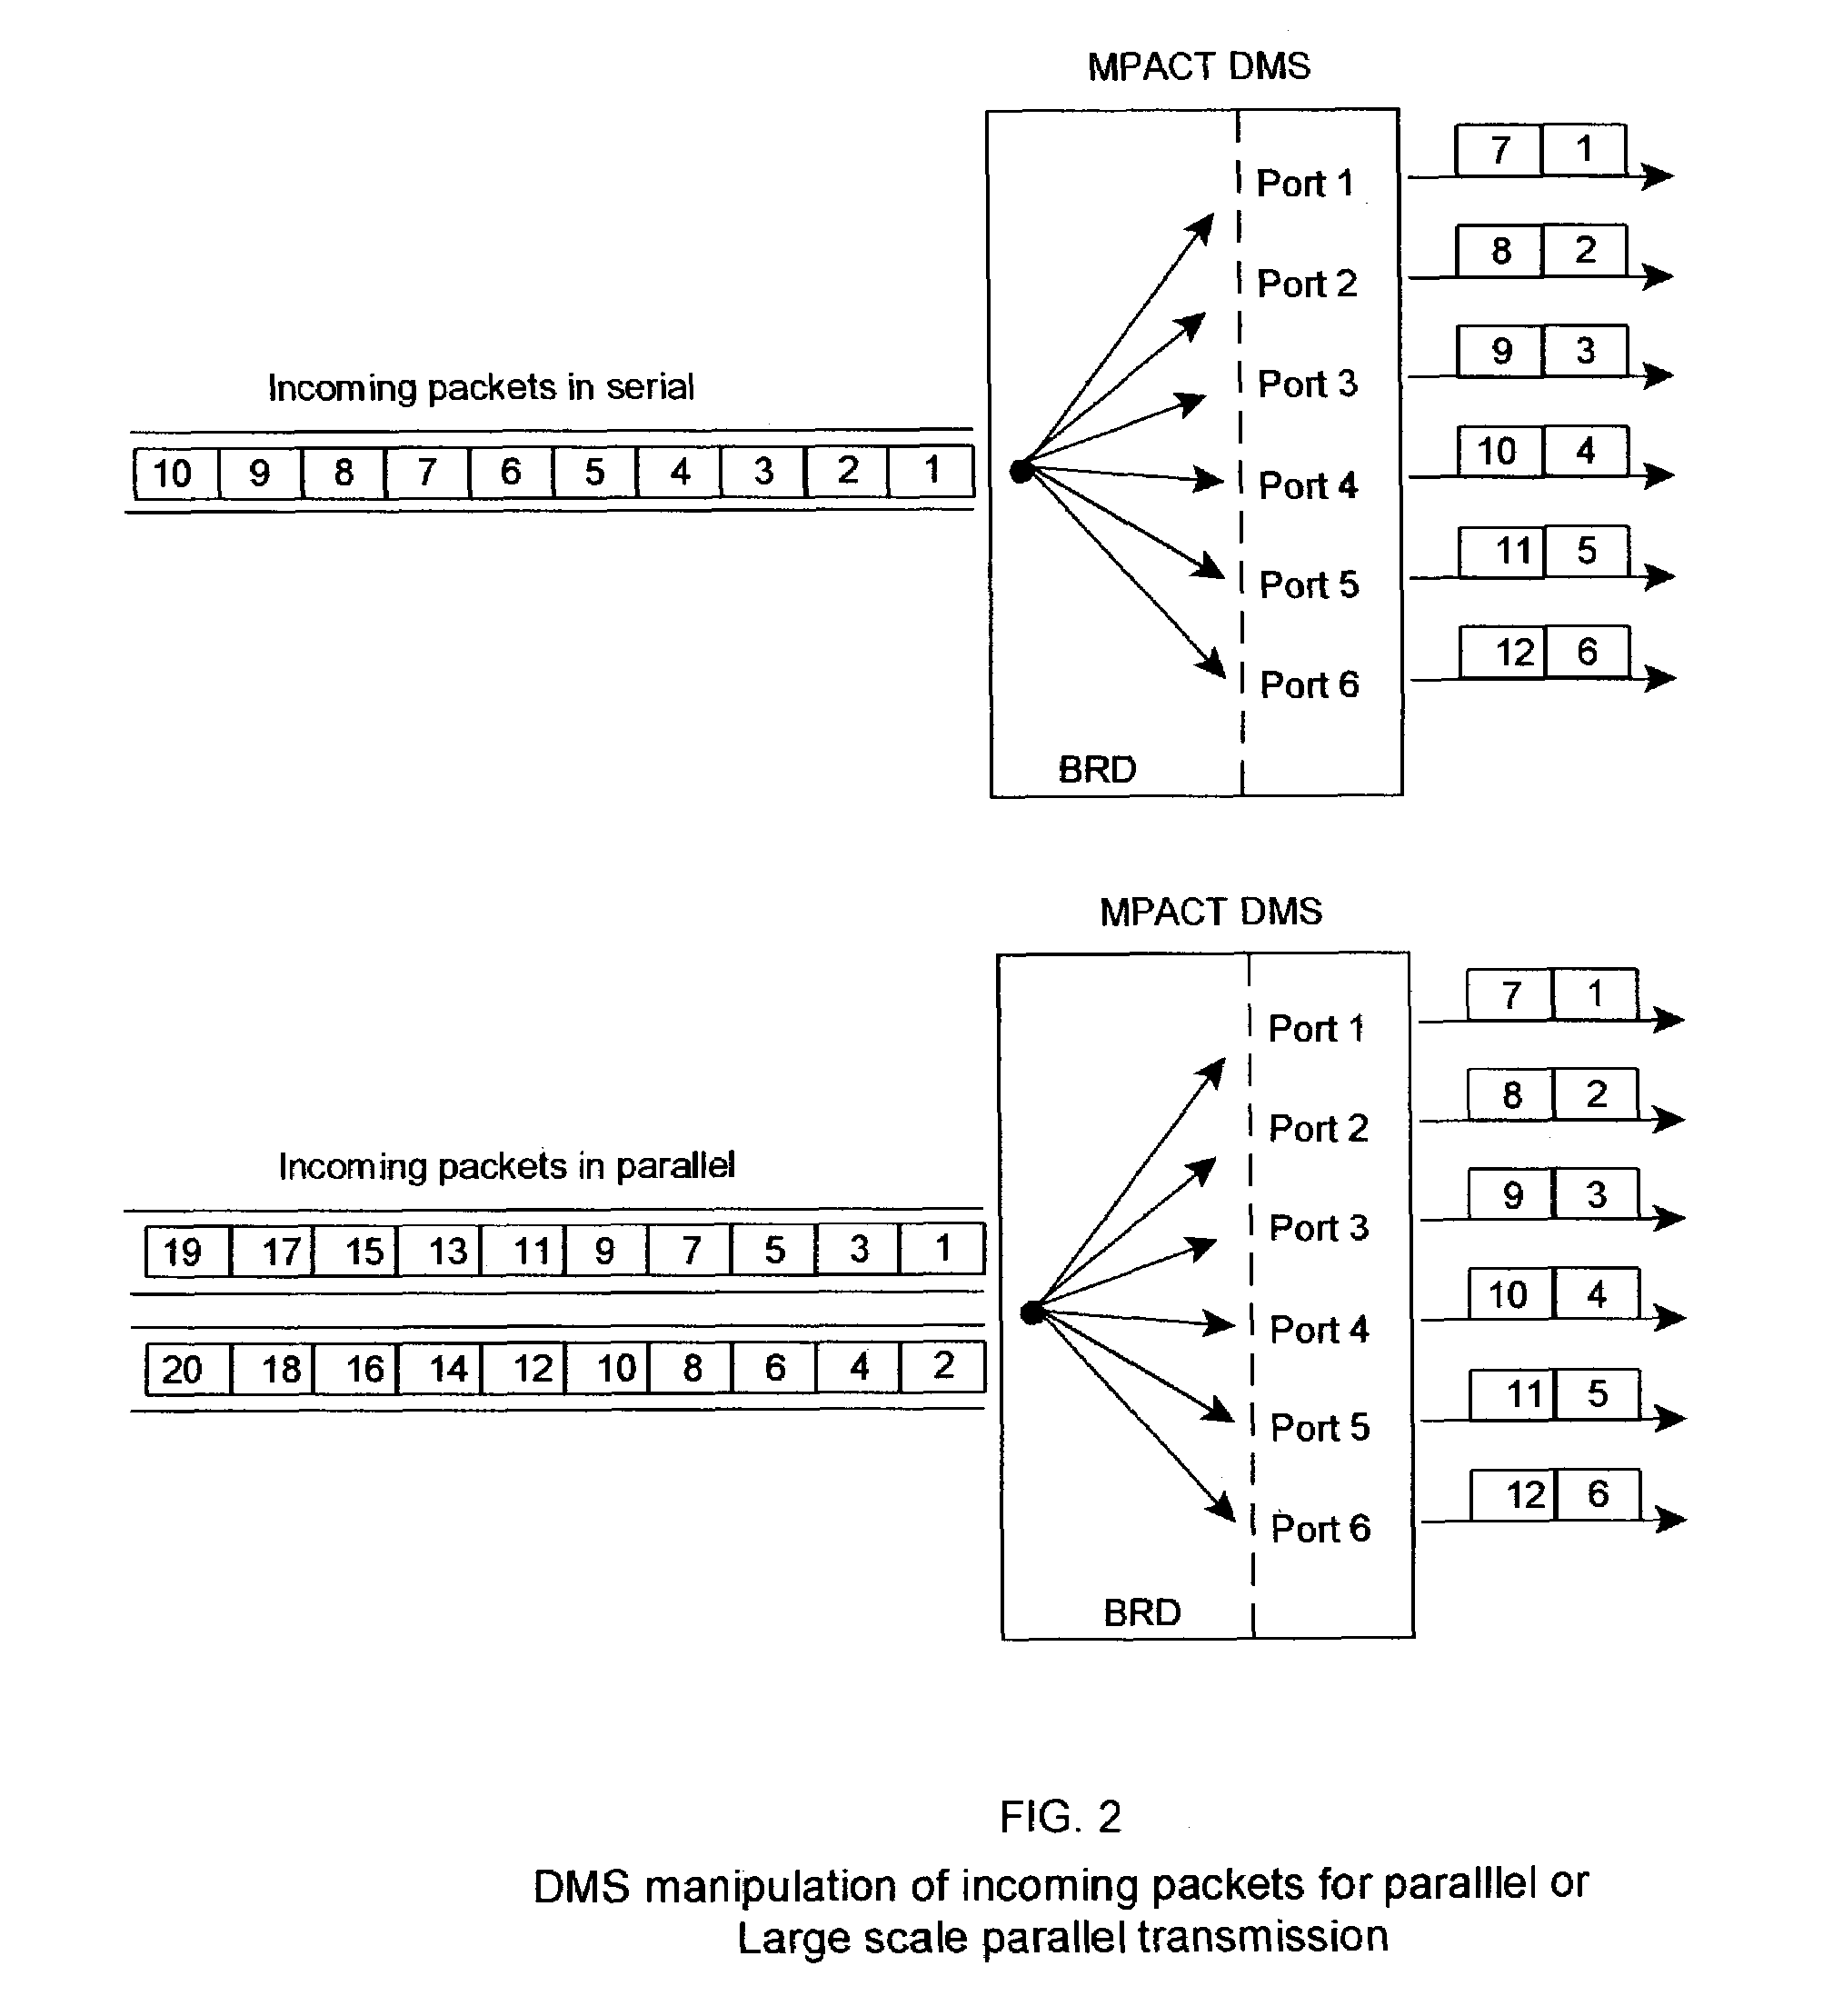 Massively parallel computer network-utilizing MPACT and multipoint parallel server (MPAS) technologies